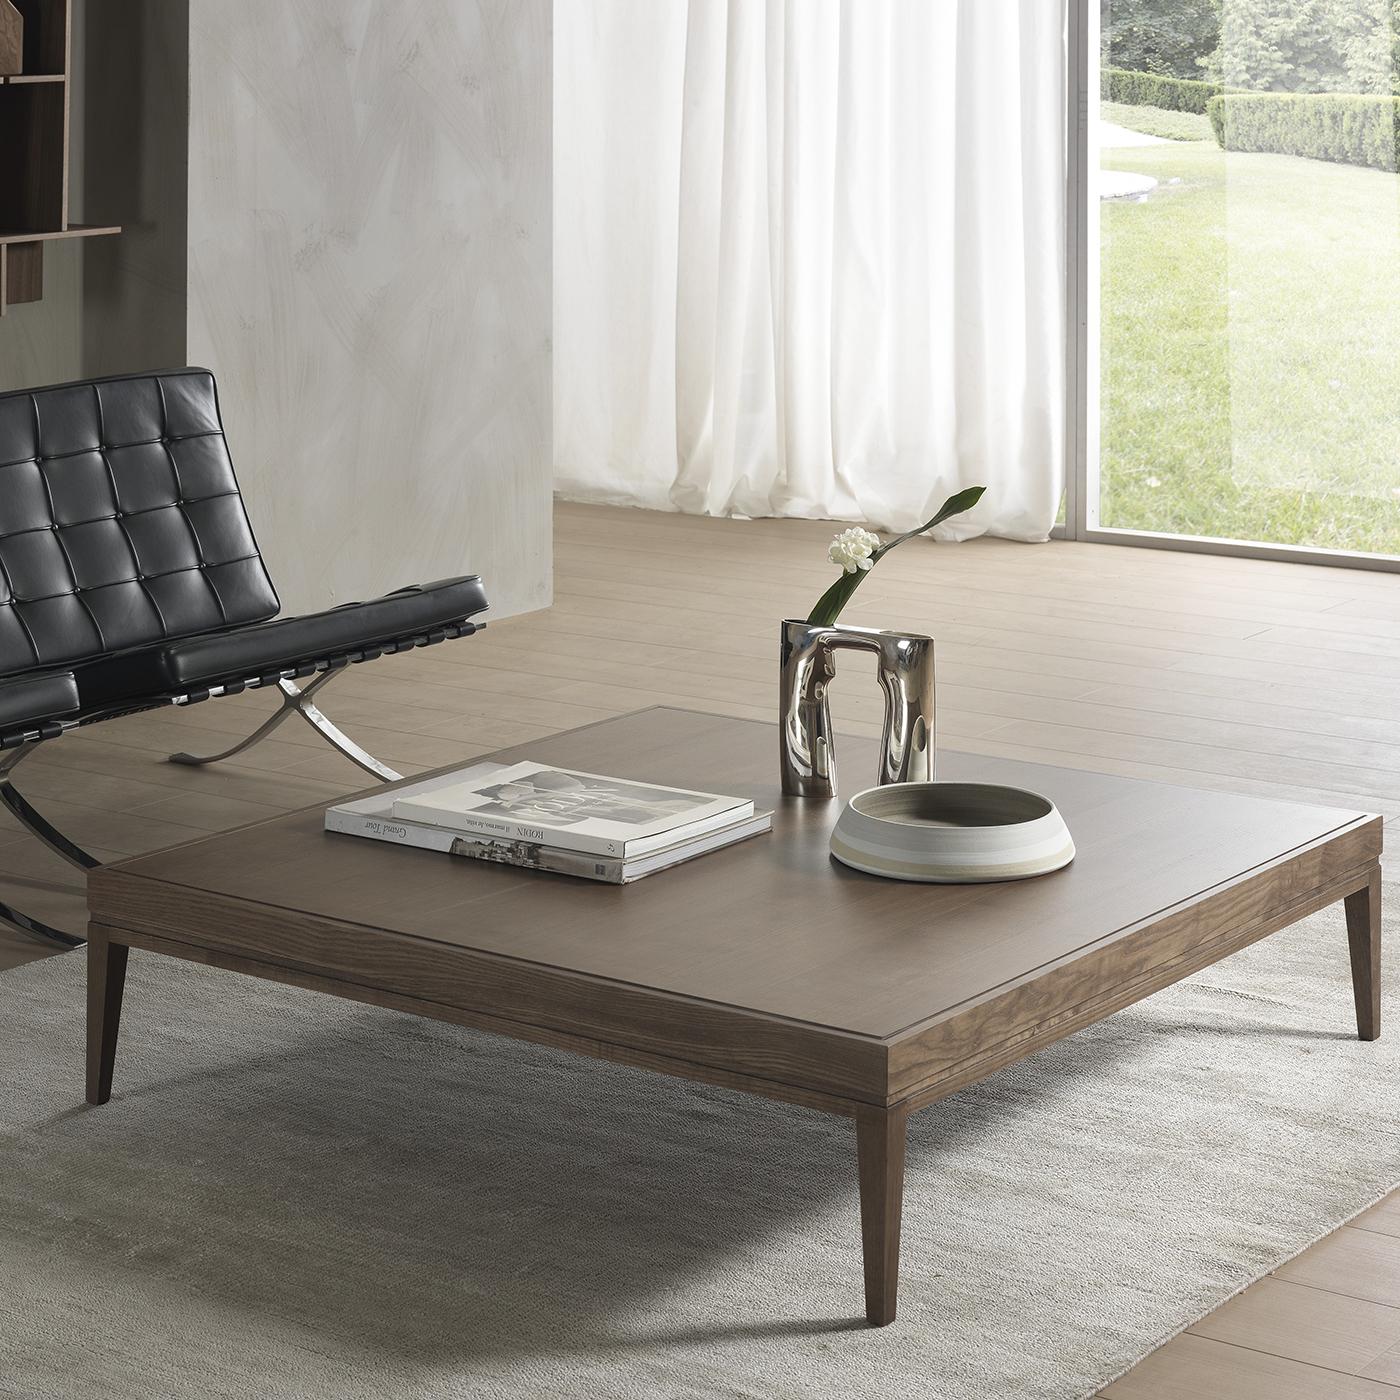 Elegant and Minimalist, this refined coffee table was designed by architect Fabio Rebosio and is also available in a rectangular version with a wooden or glass top. In this version, the square silhouette of the piece is entirely crafted of ash with